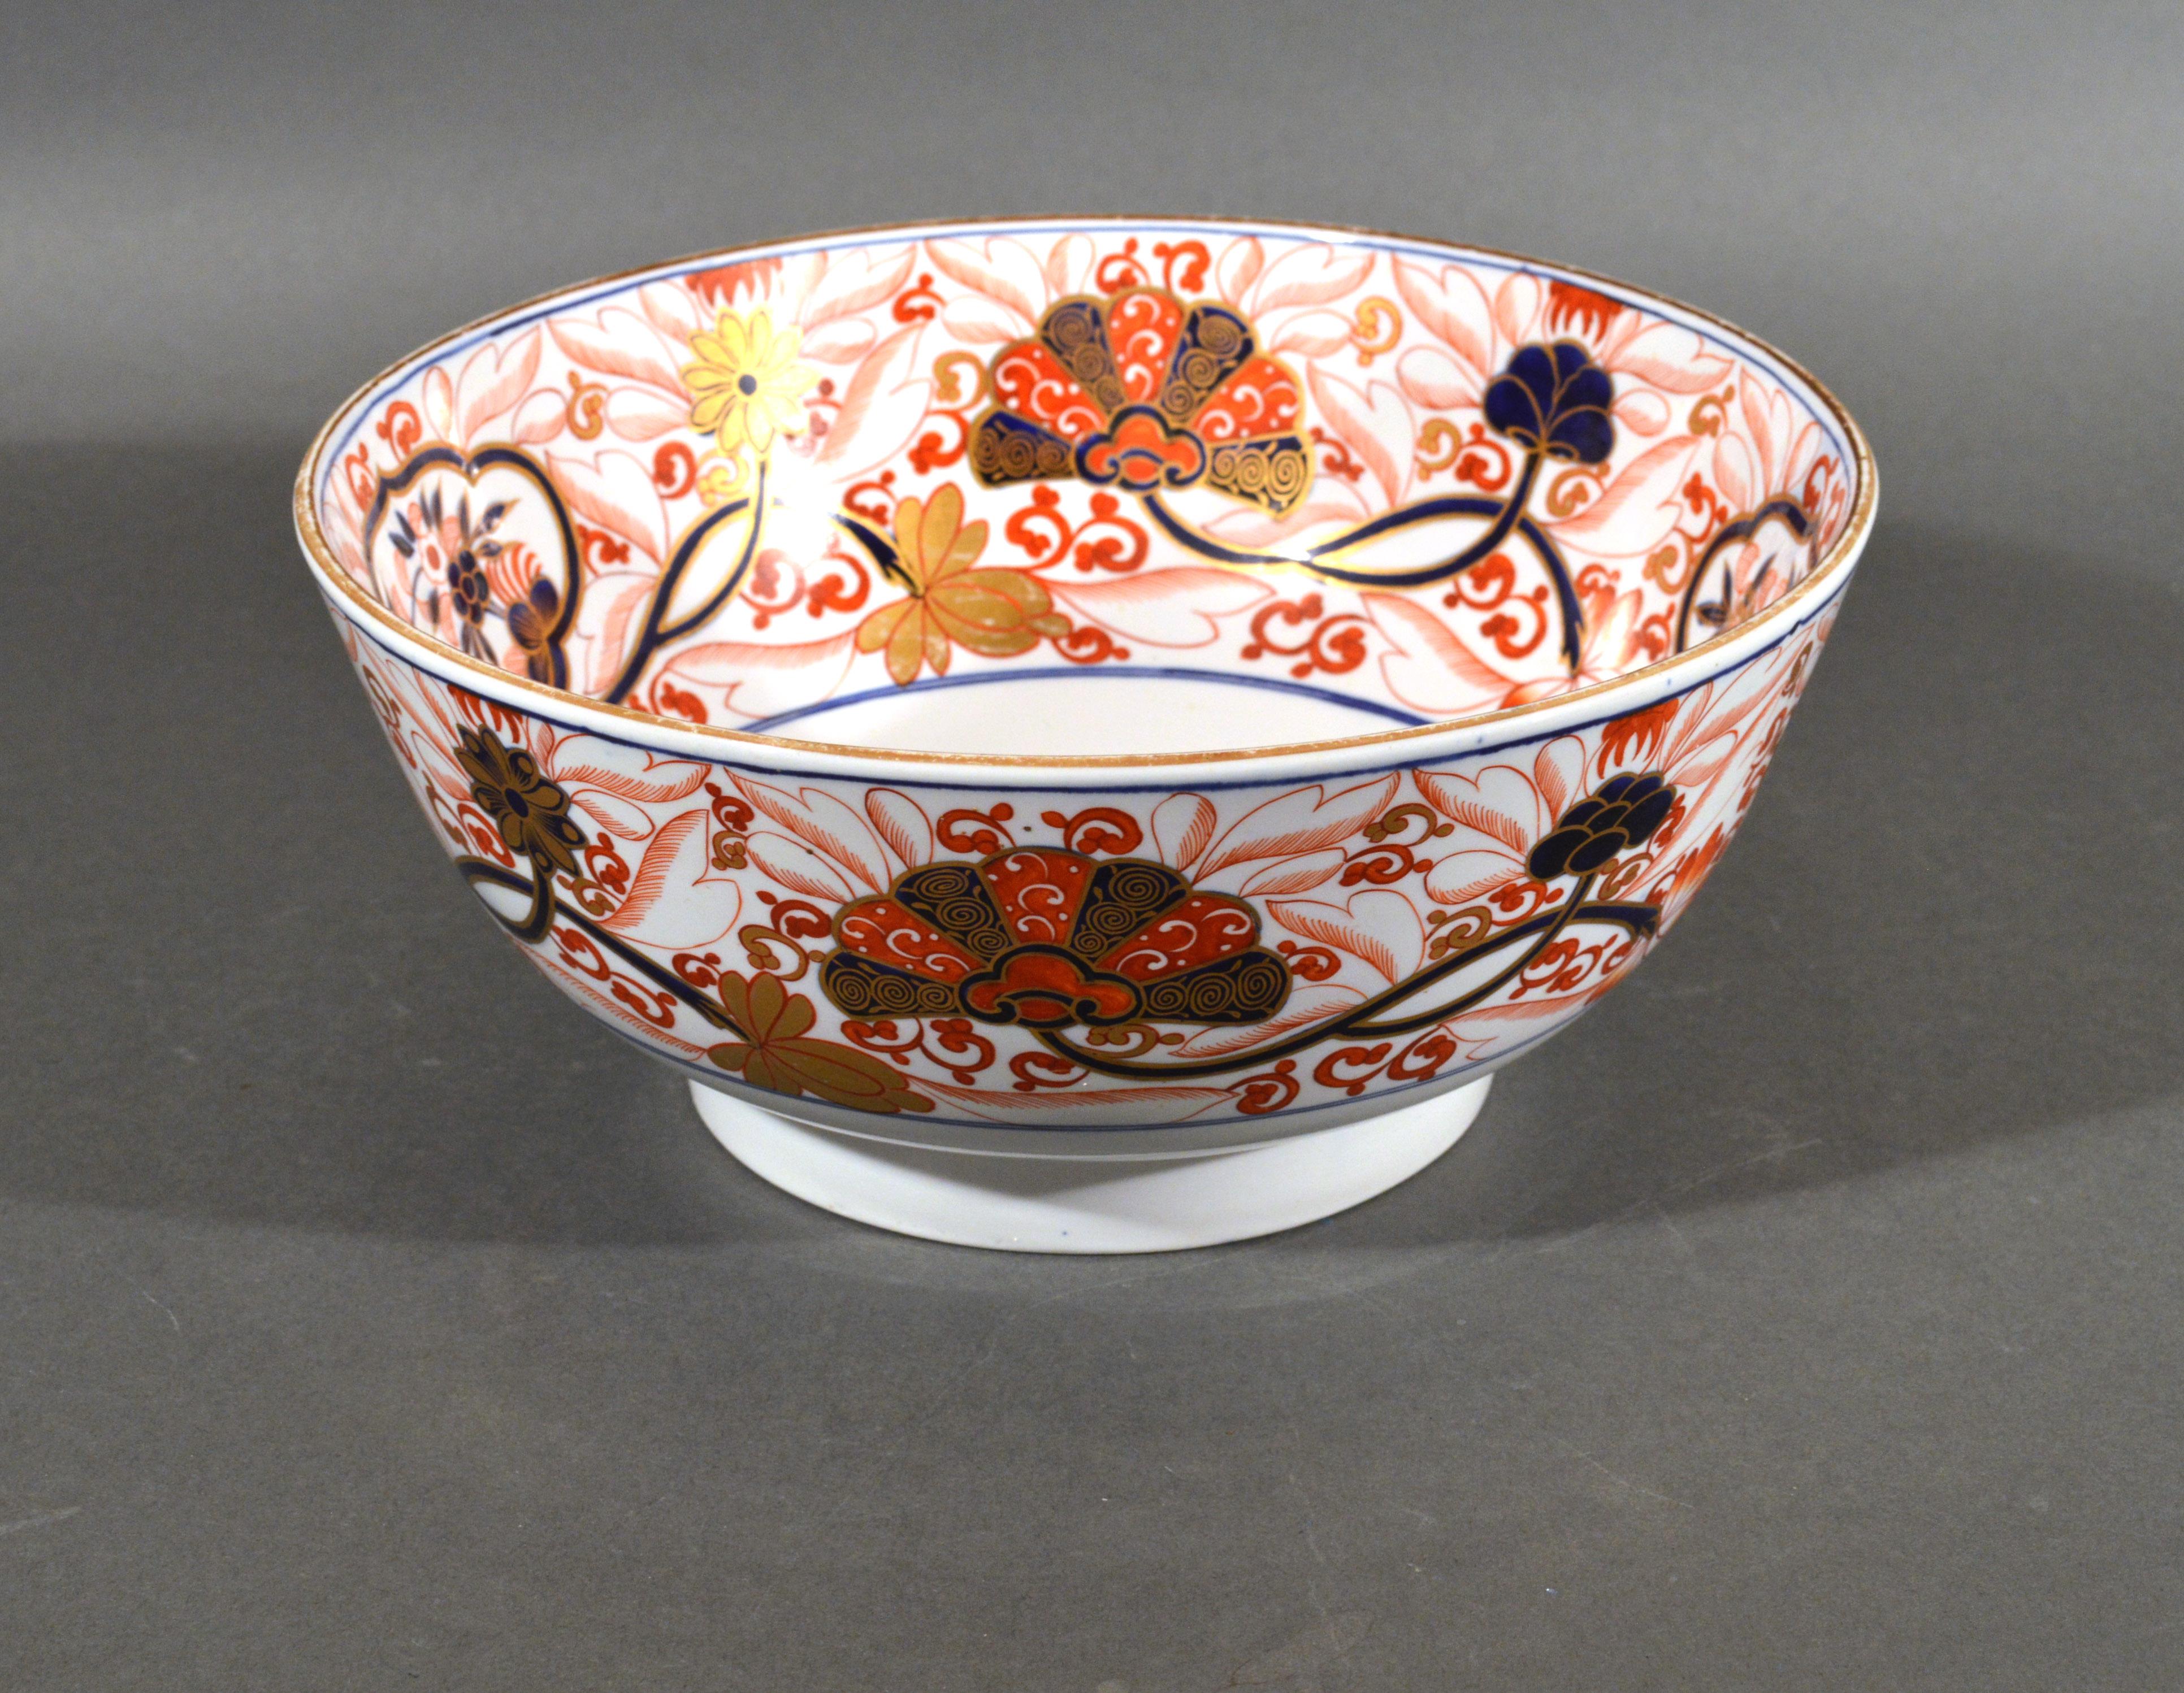 Regency Spode Imari Punch Bowl, Pattern # 2283 In Good Condition For Sale In Downingtown, PA